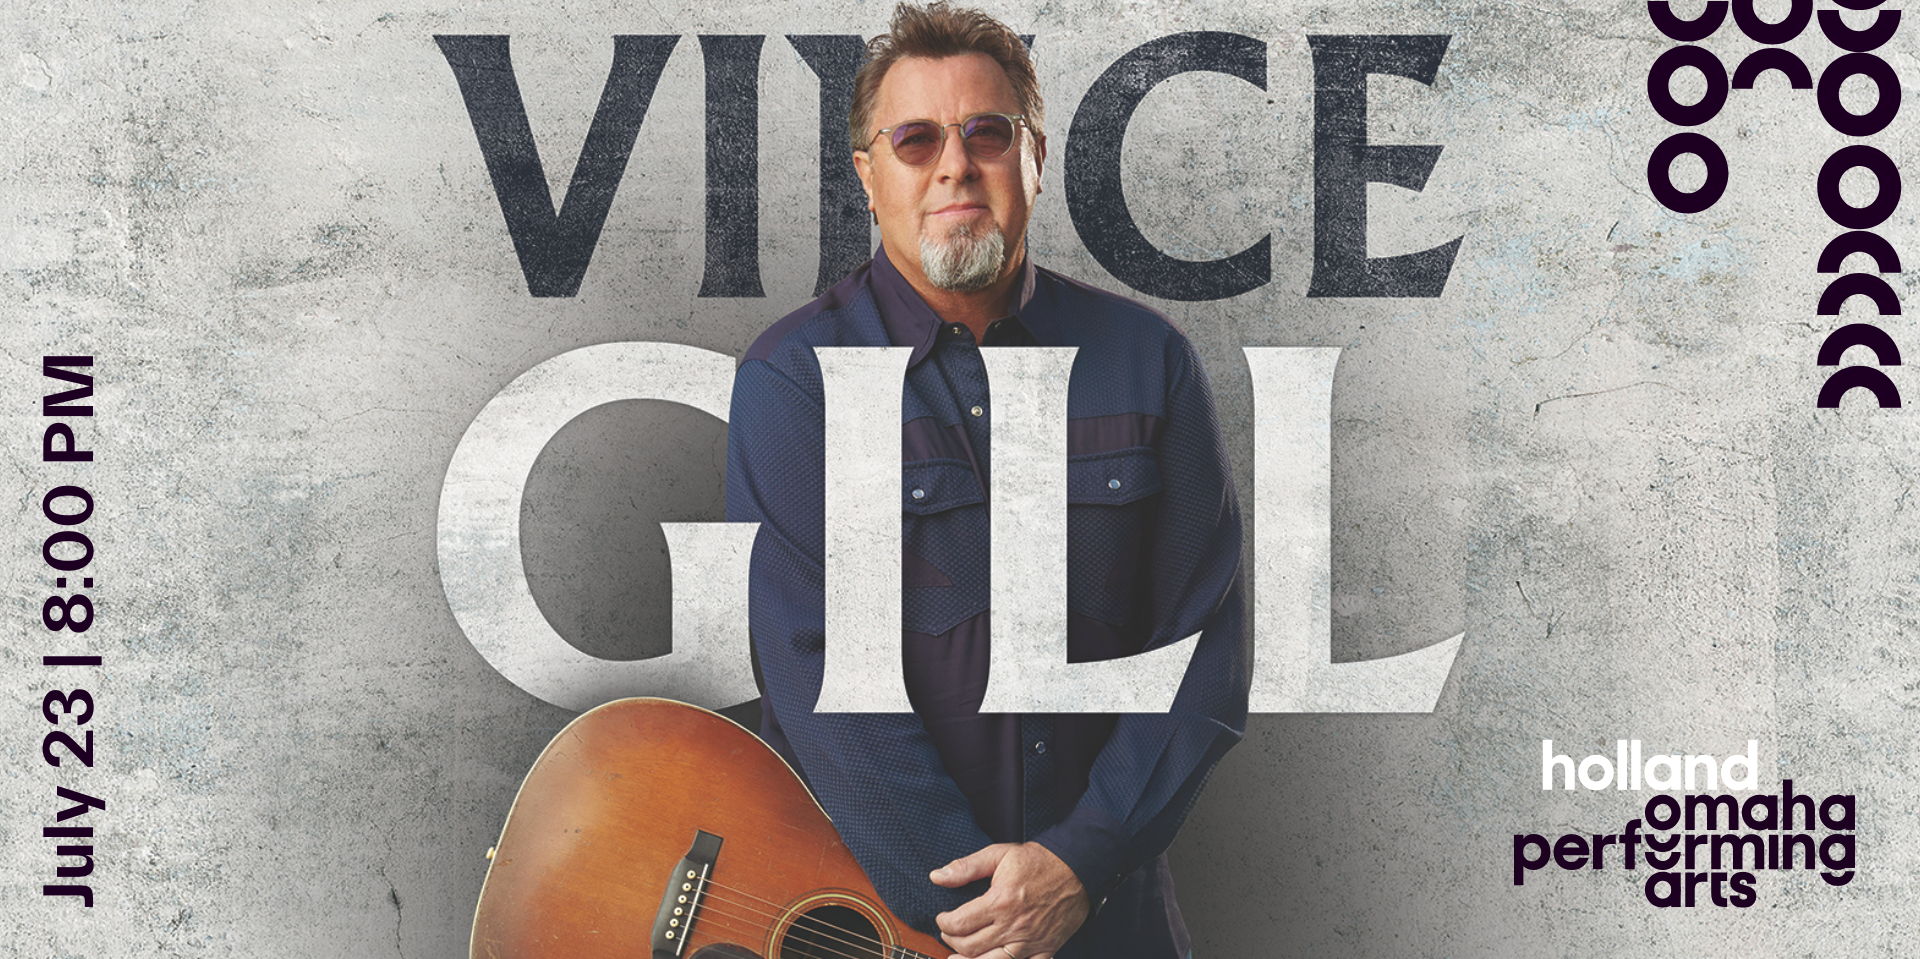 Vince Gill promotional image